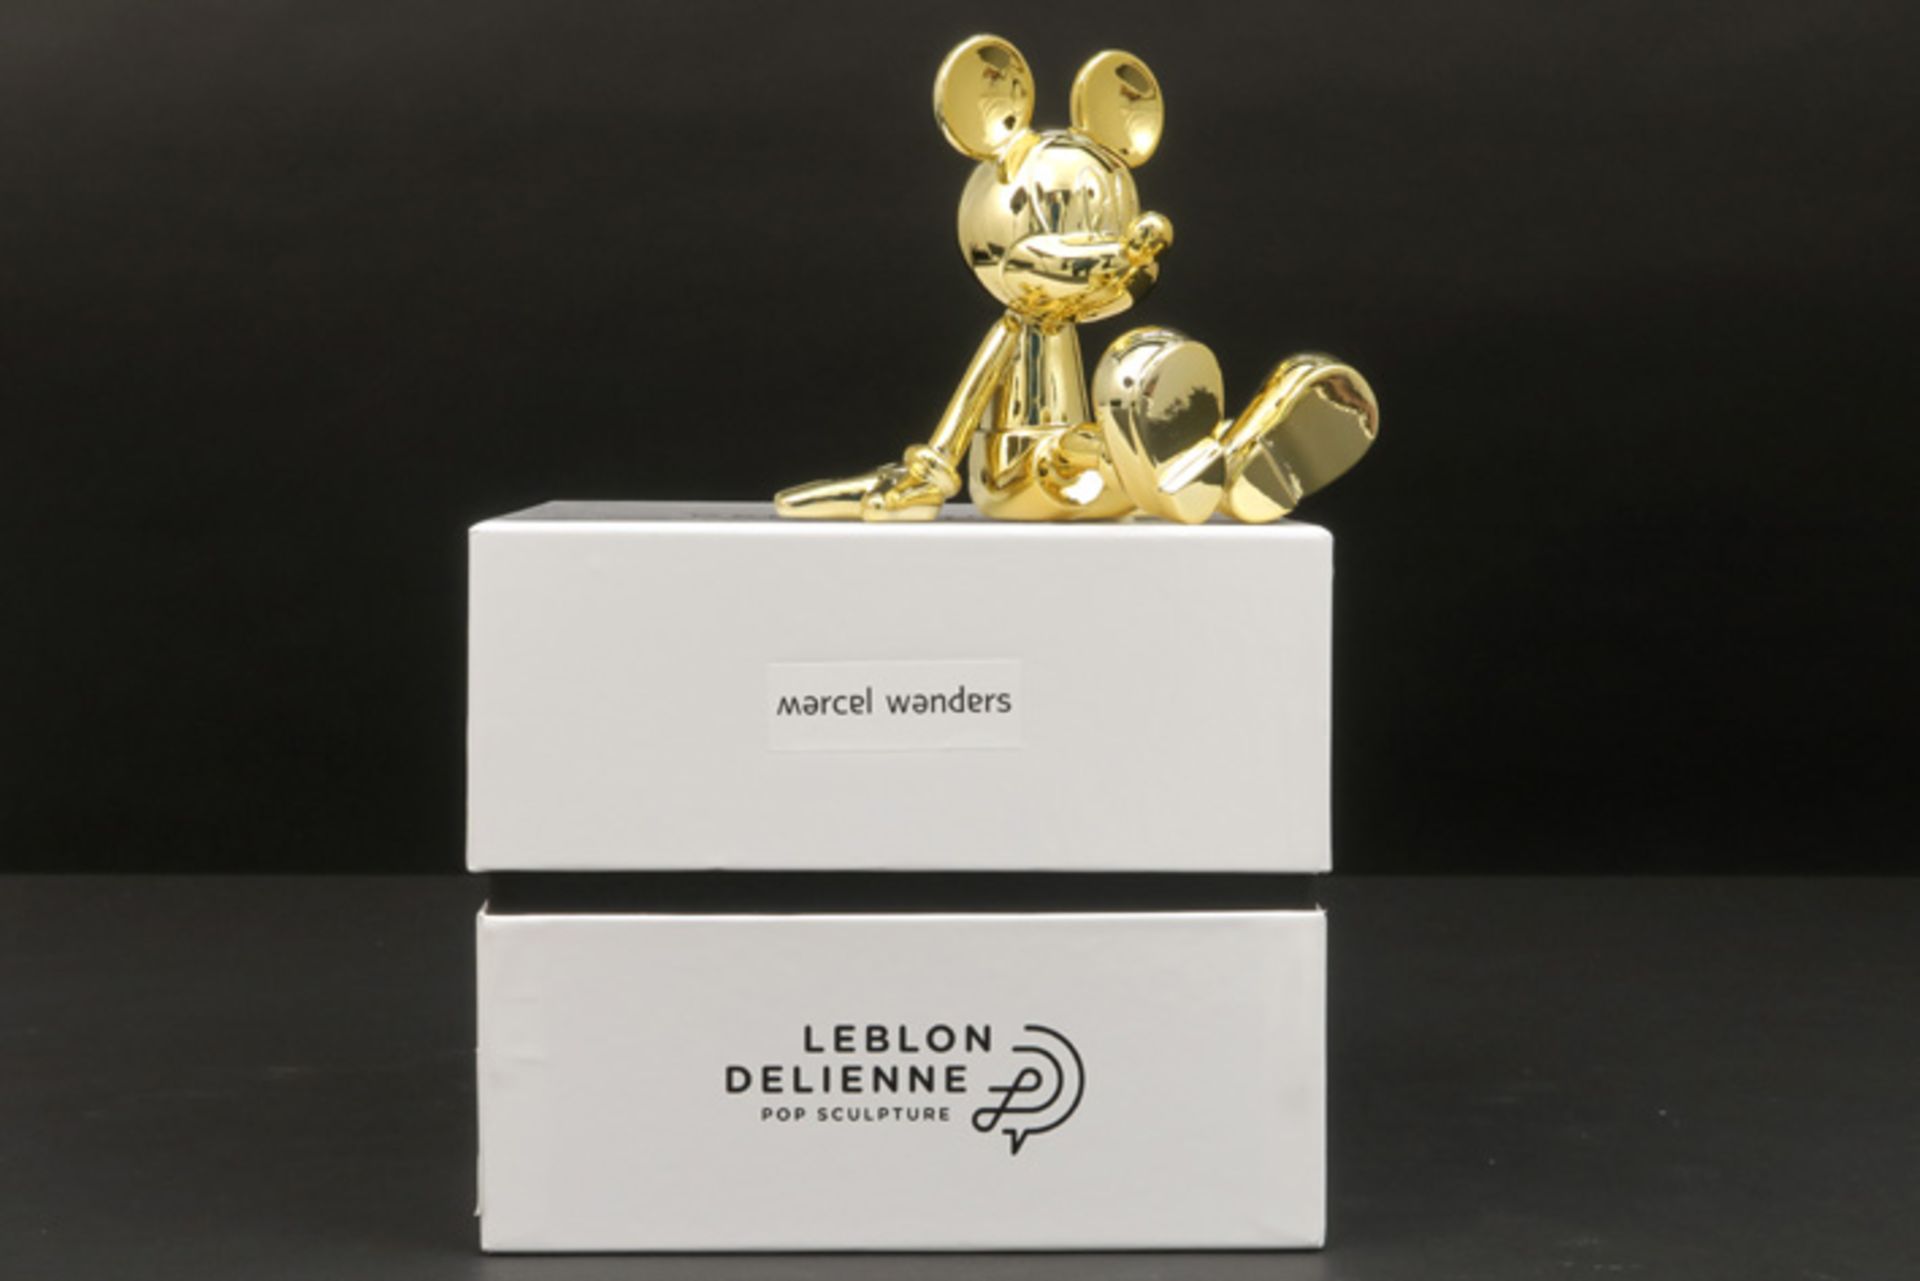 Marcel Wanders "sitting Mickey" sculpture in resin - marked and with certificate||WANDERS